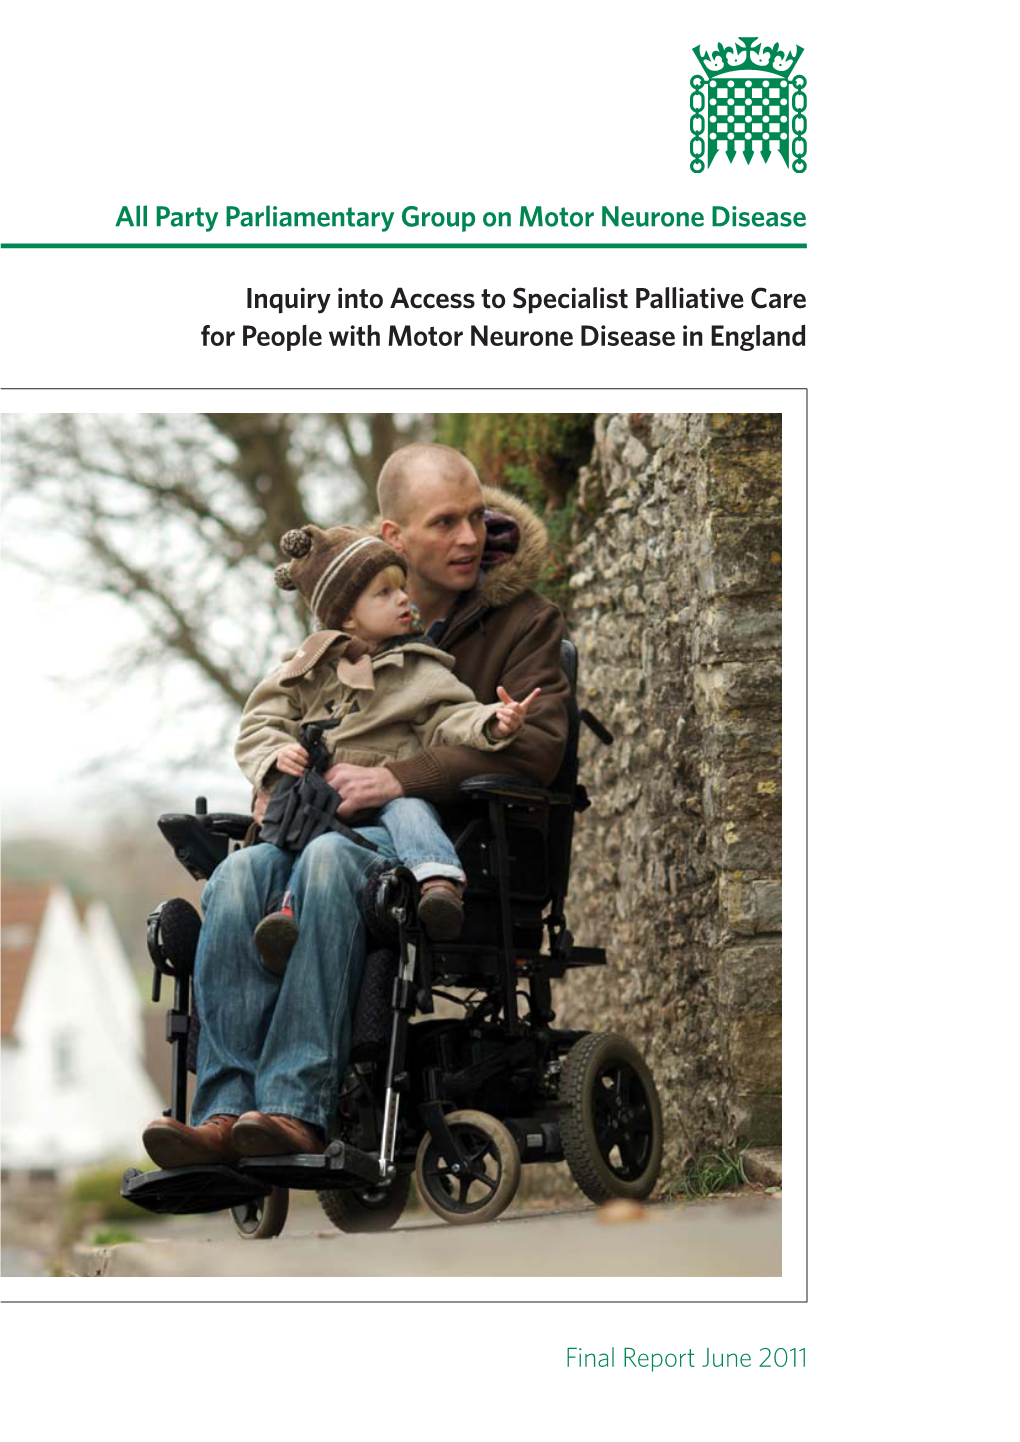 Inquiry Into Access to Specialist Palliative Care for People with Motor Neurone Disease in England